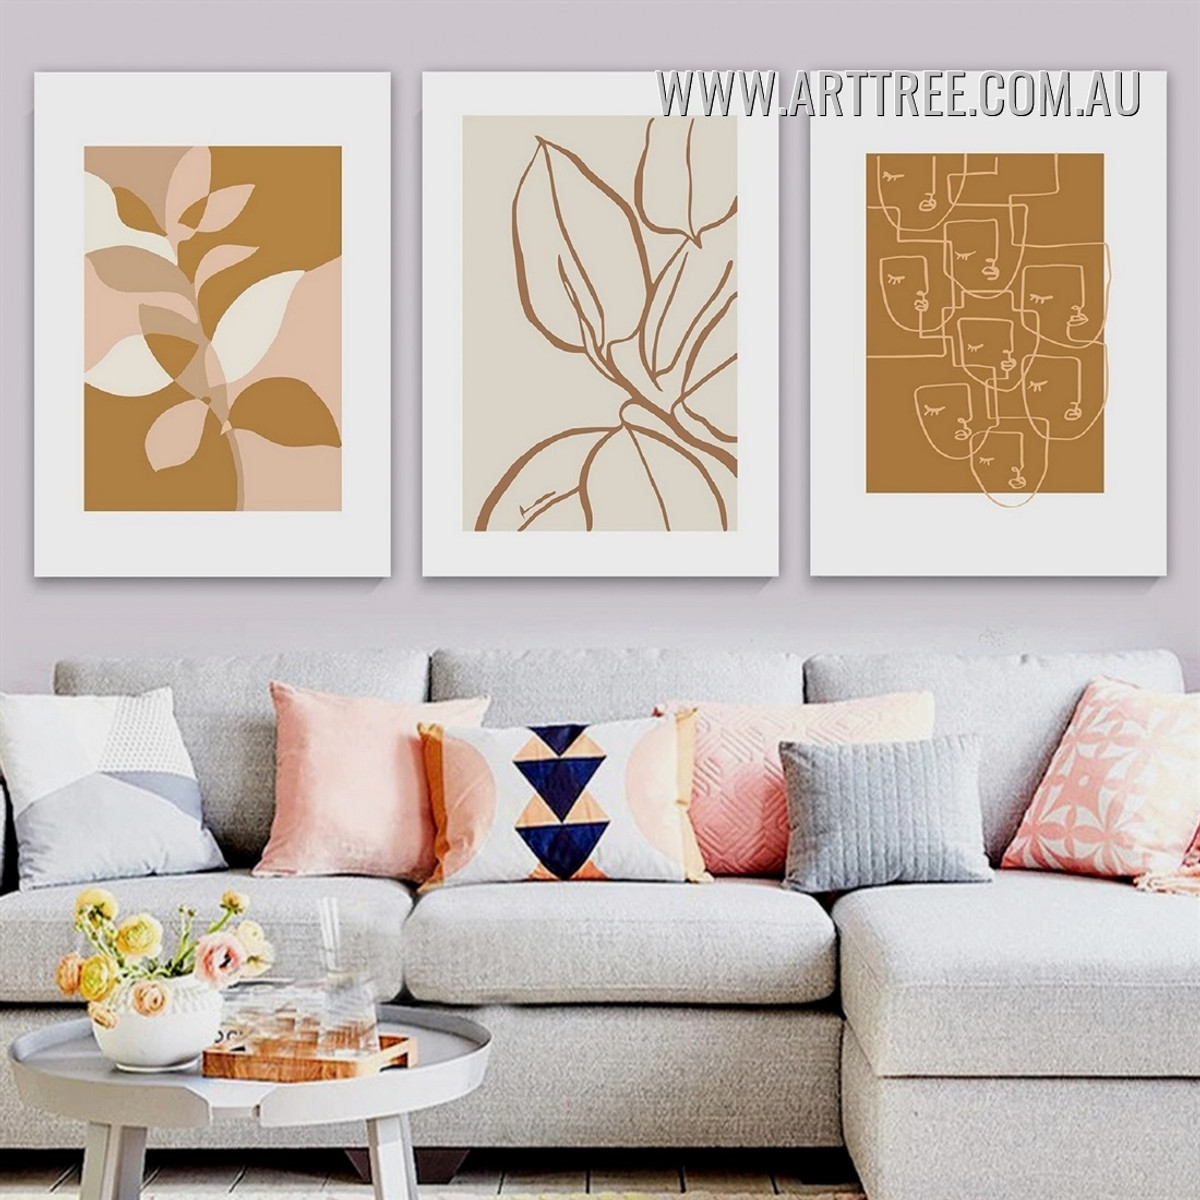 Visage Streak Art Leaves Abstract Minimalist 3 Piece Framed Scandinavian Painting Photograph Canvas Print for Room Wall Finery